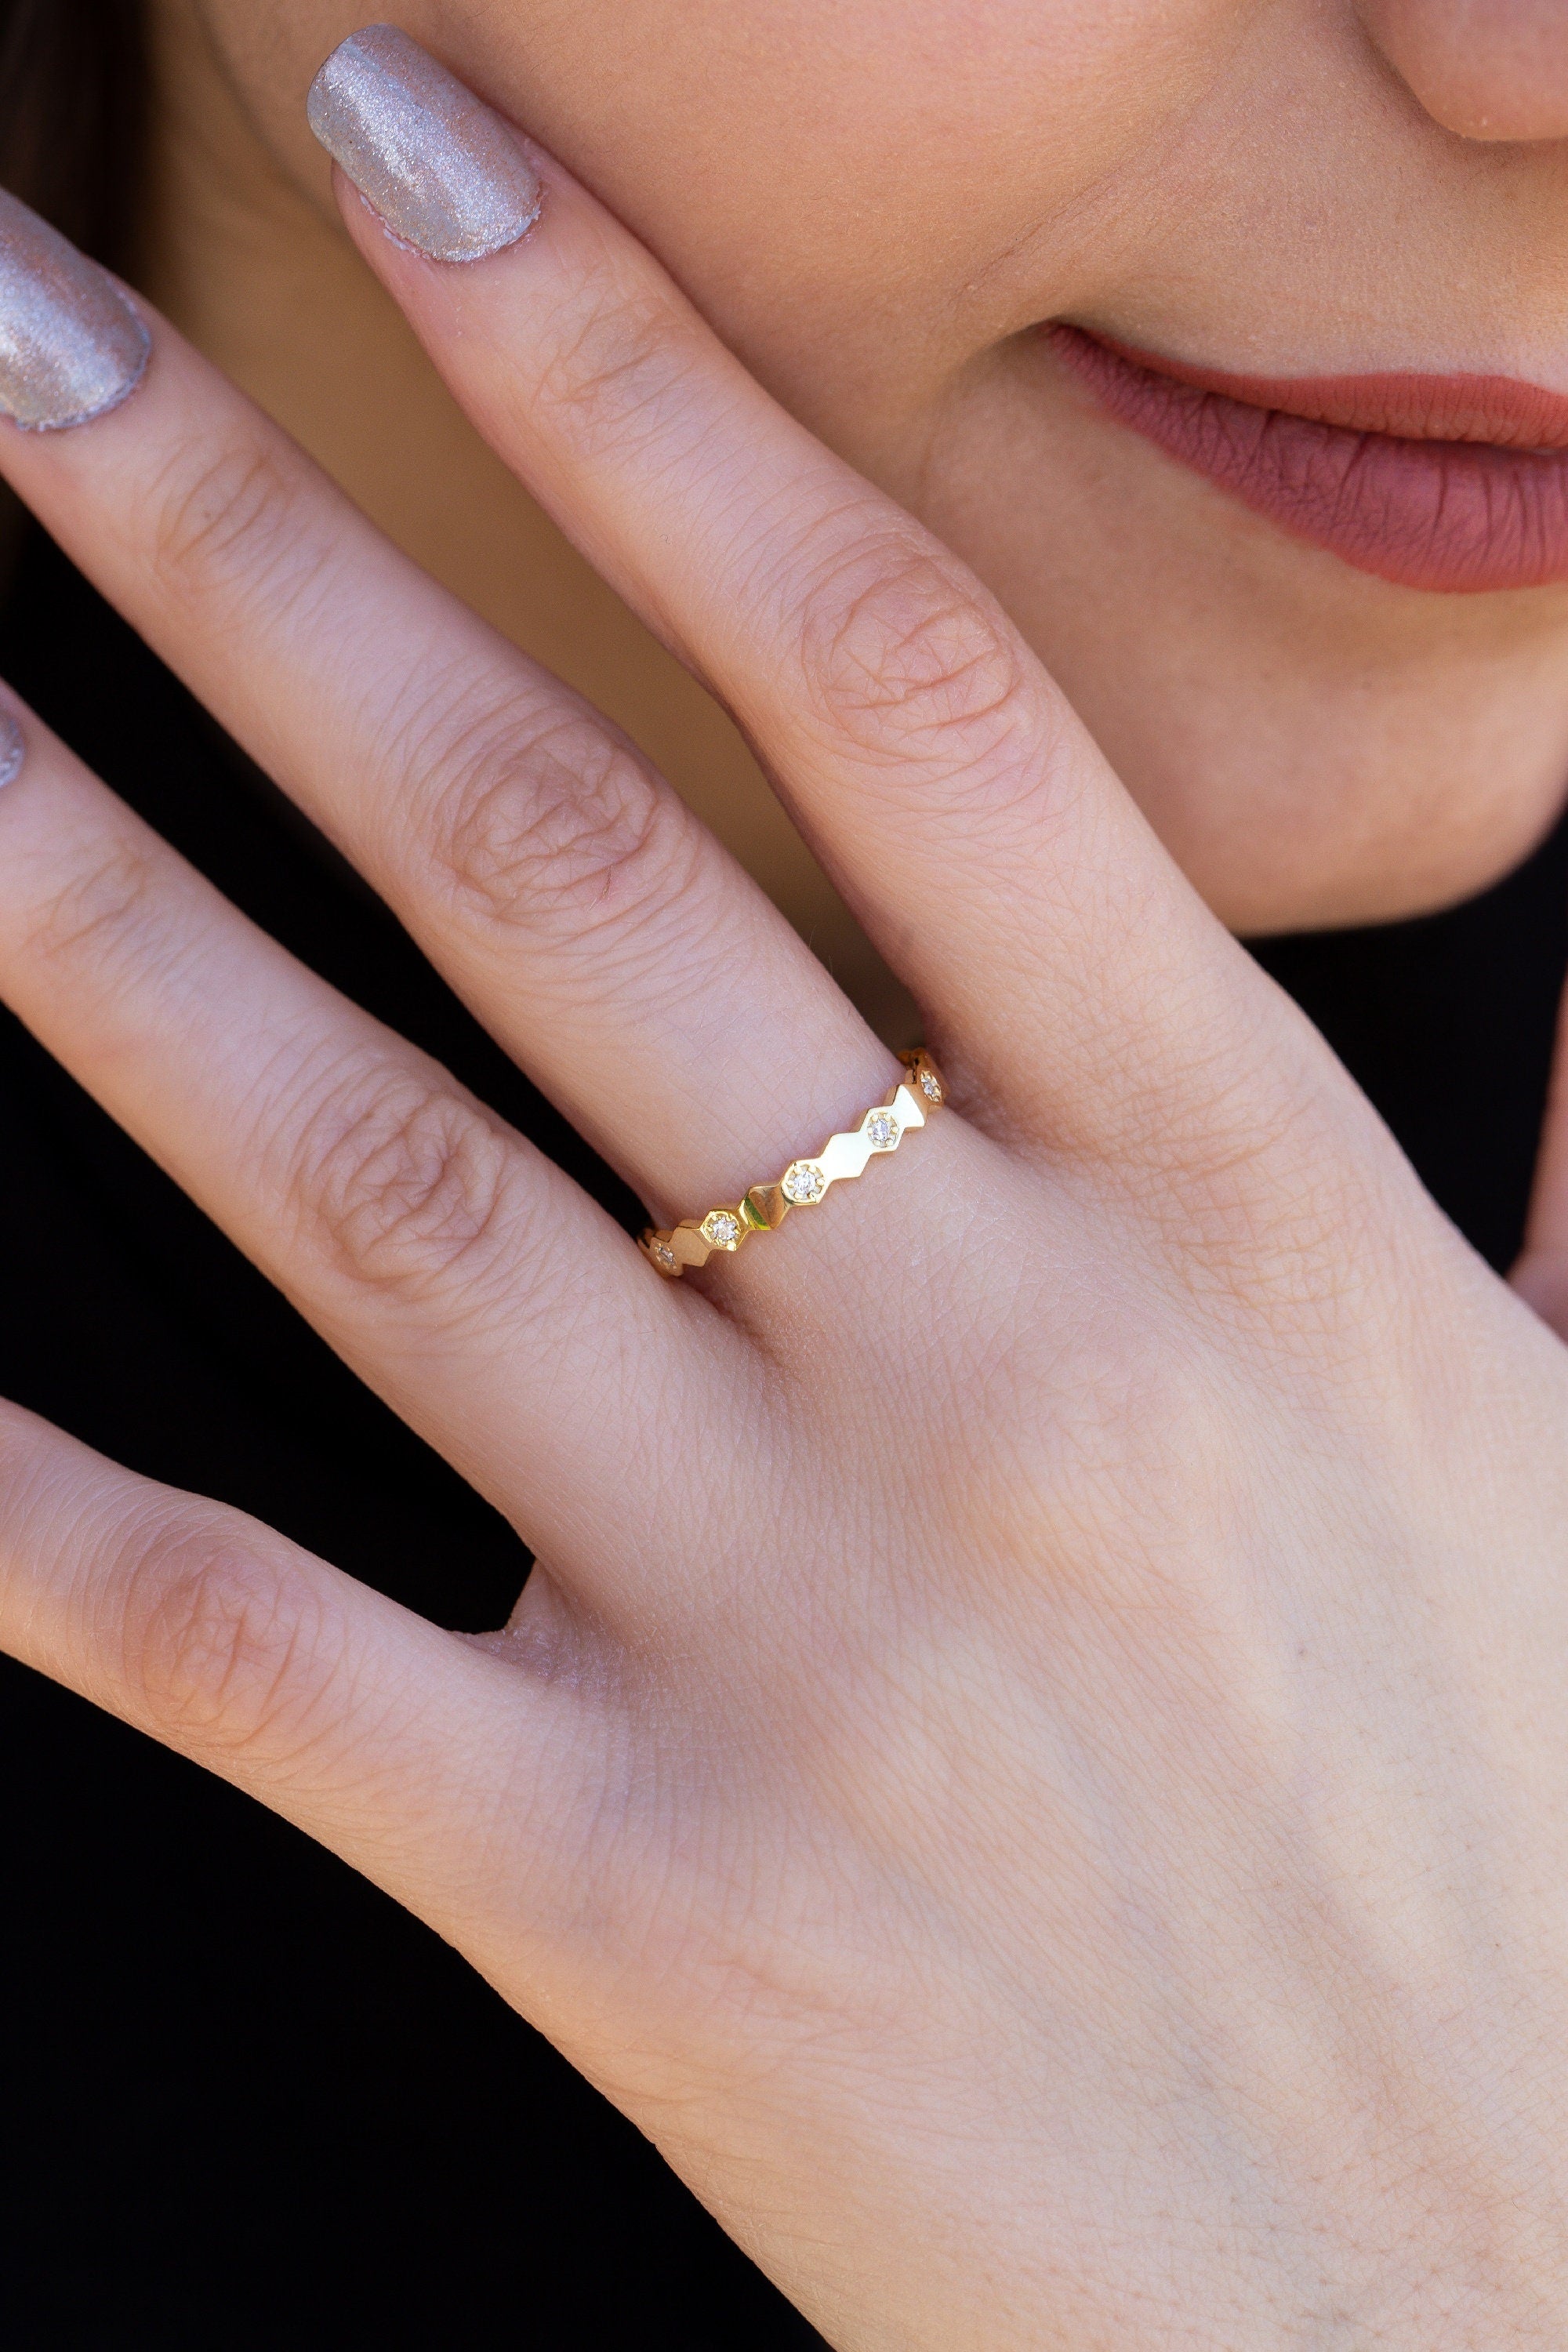 14K Geometric Gold Ring, Wedding Ring Simple Minimalist, 925 Silver Diamond Ring, Rings for Women, Silver Stone Quadrilateral Ring